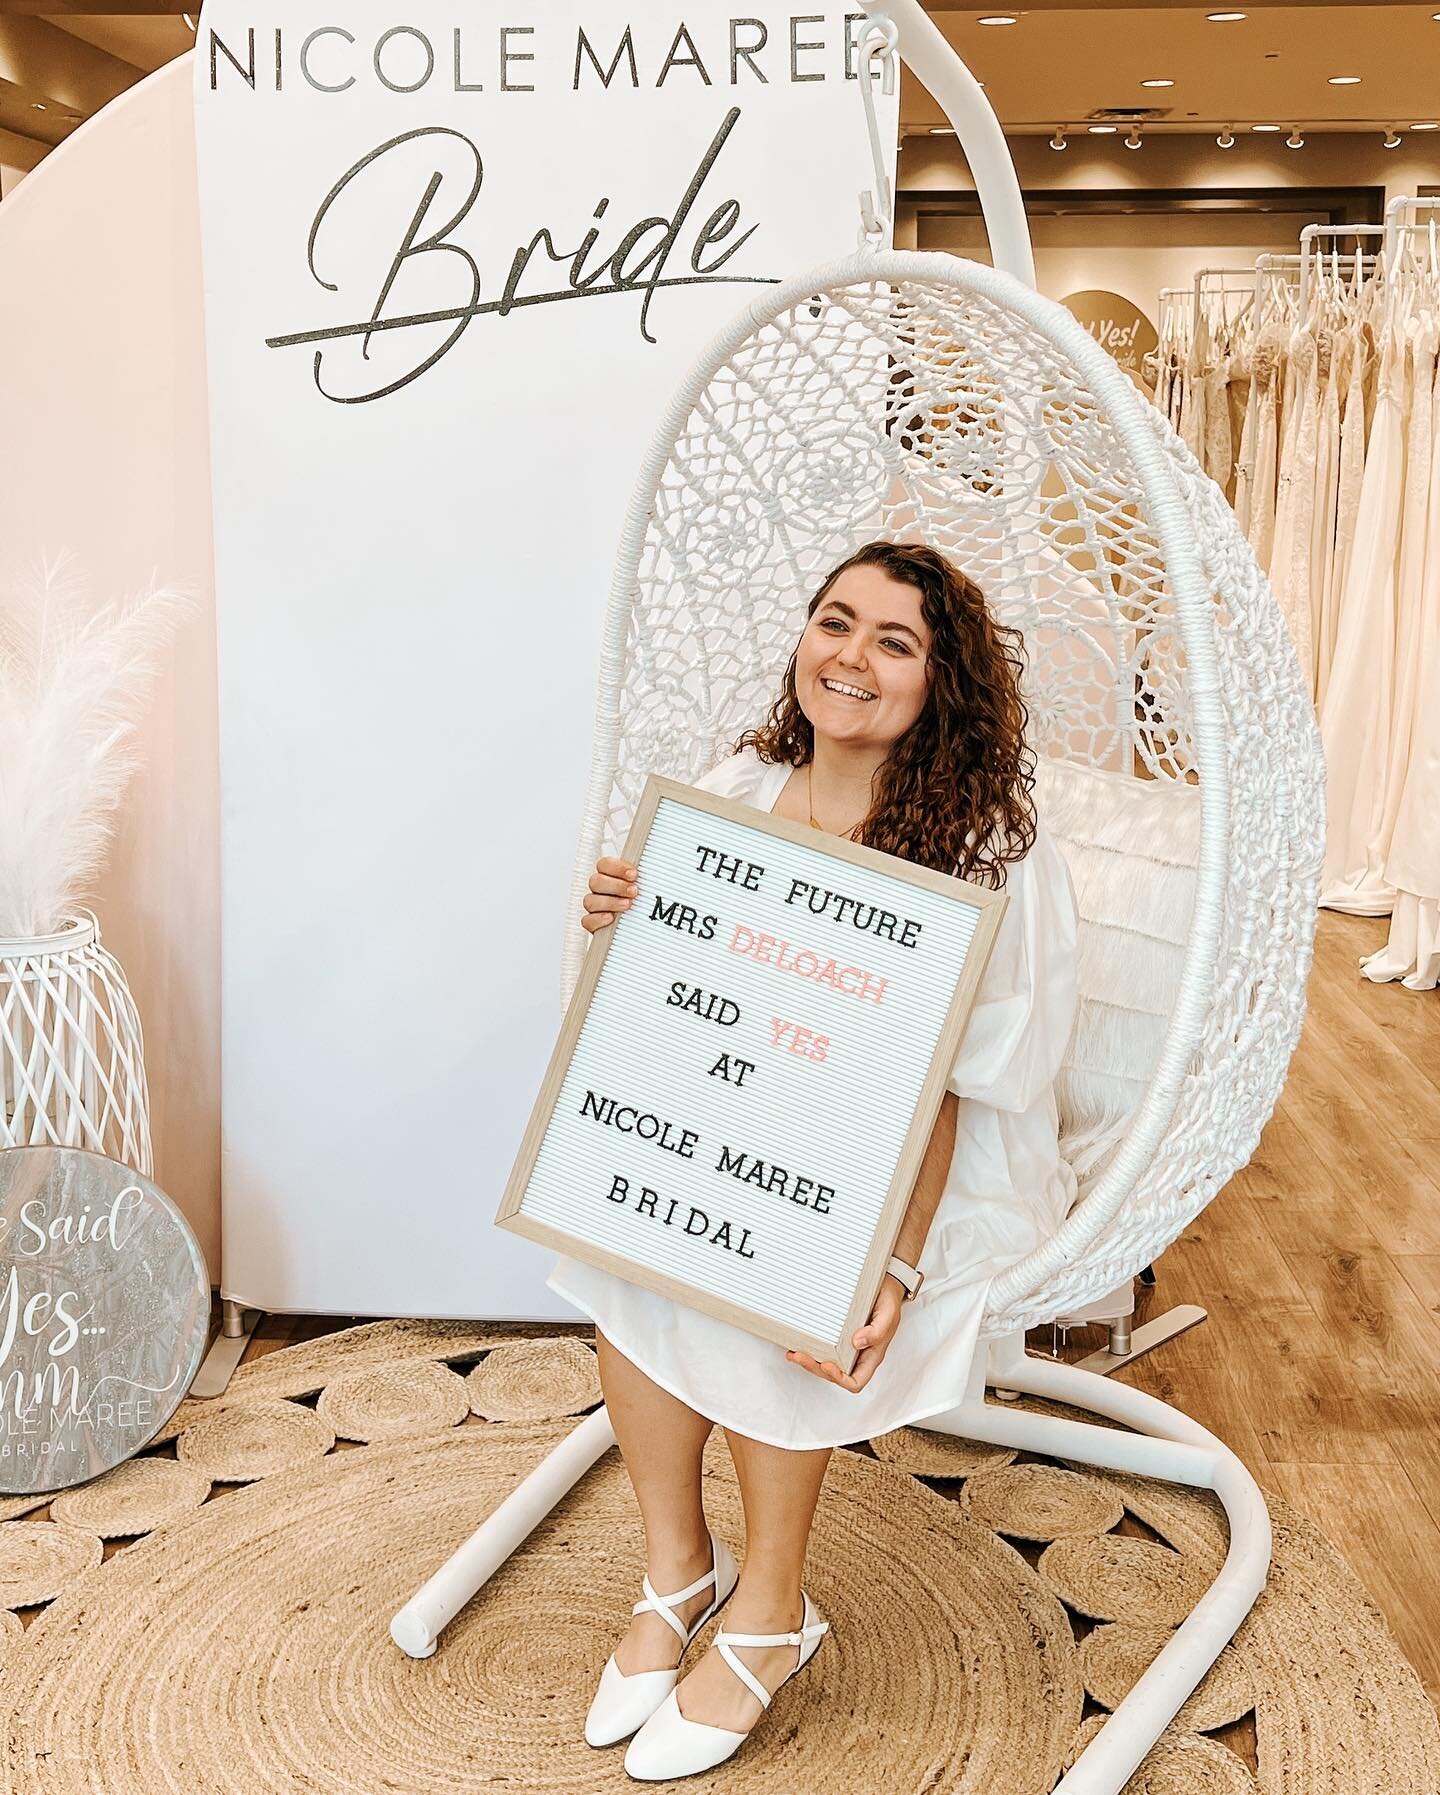 This weekend, I said yes to the dress! 🥹🥰 It still feels like a dream, and I&rsquo;m not sure how I&rsquo;m supposed to keep this secret from Jason for a whole year 🙈 Special shout out to the amazing @nicolemareebridal - I cannot recommend them en